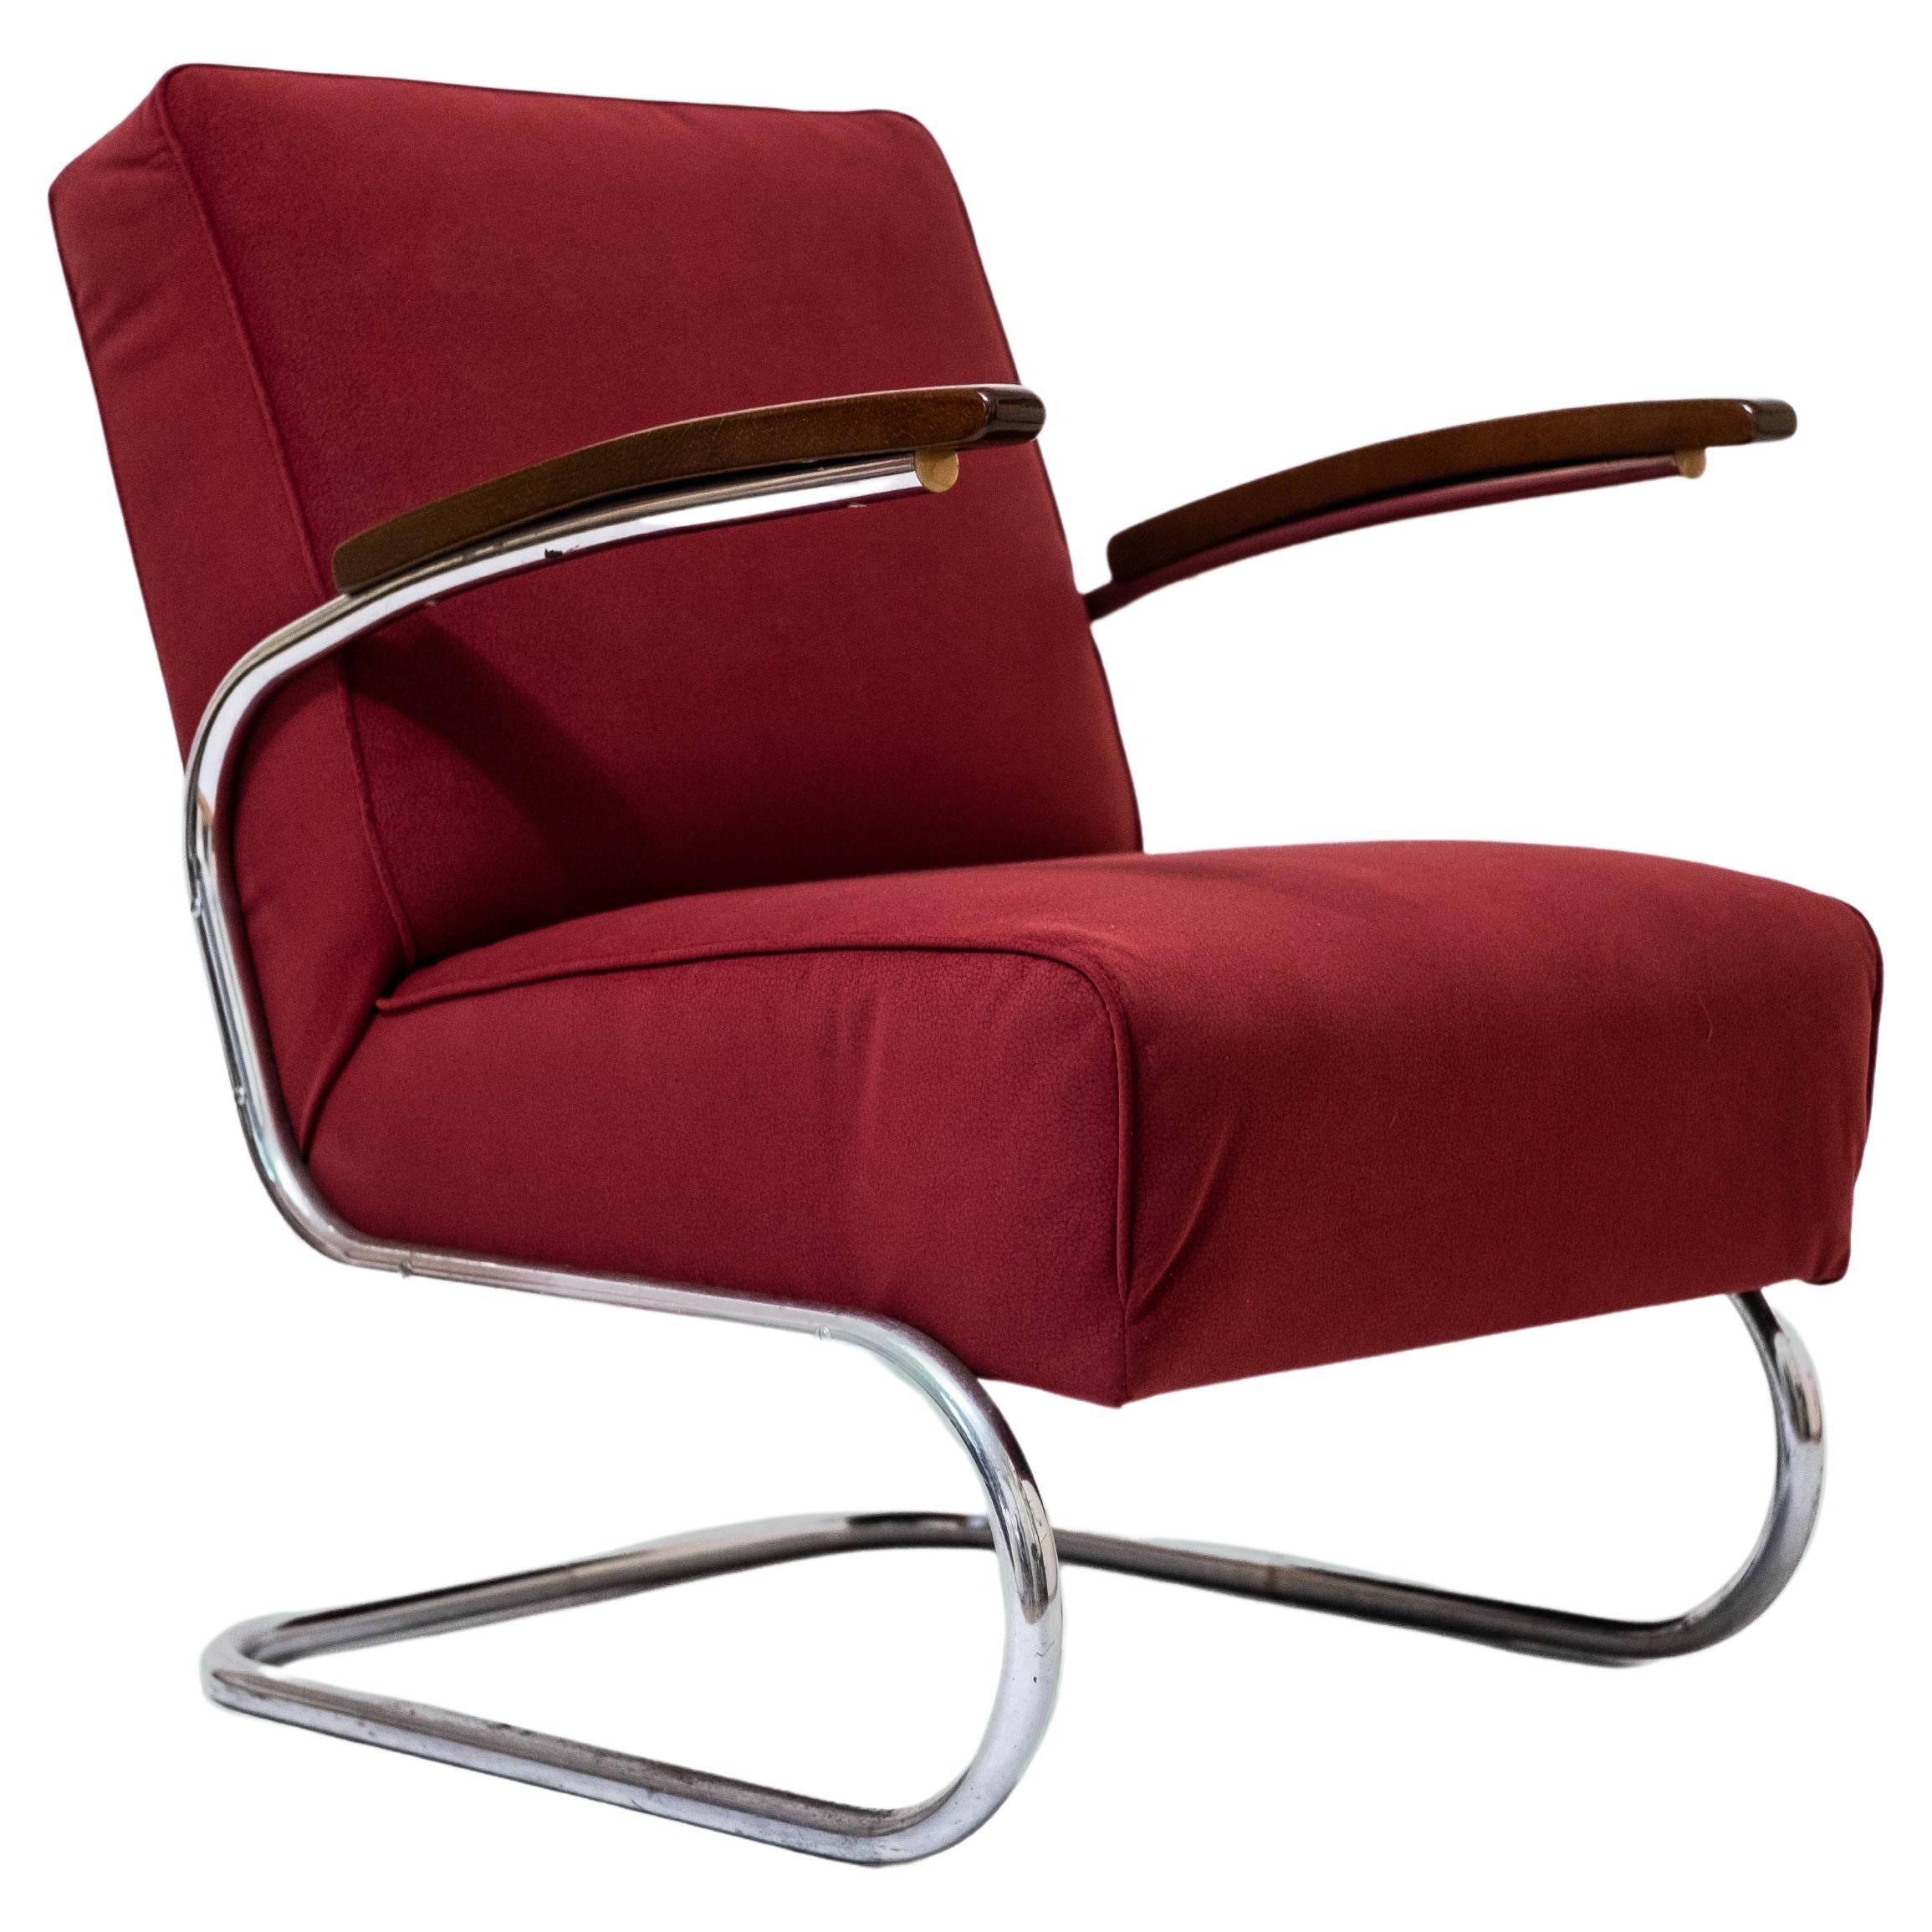 Bauhaus Steelpipe-Fauteuil by Walter Knoll for Tonet Brothers (Vienna, 1935) For Sale